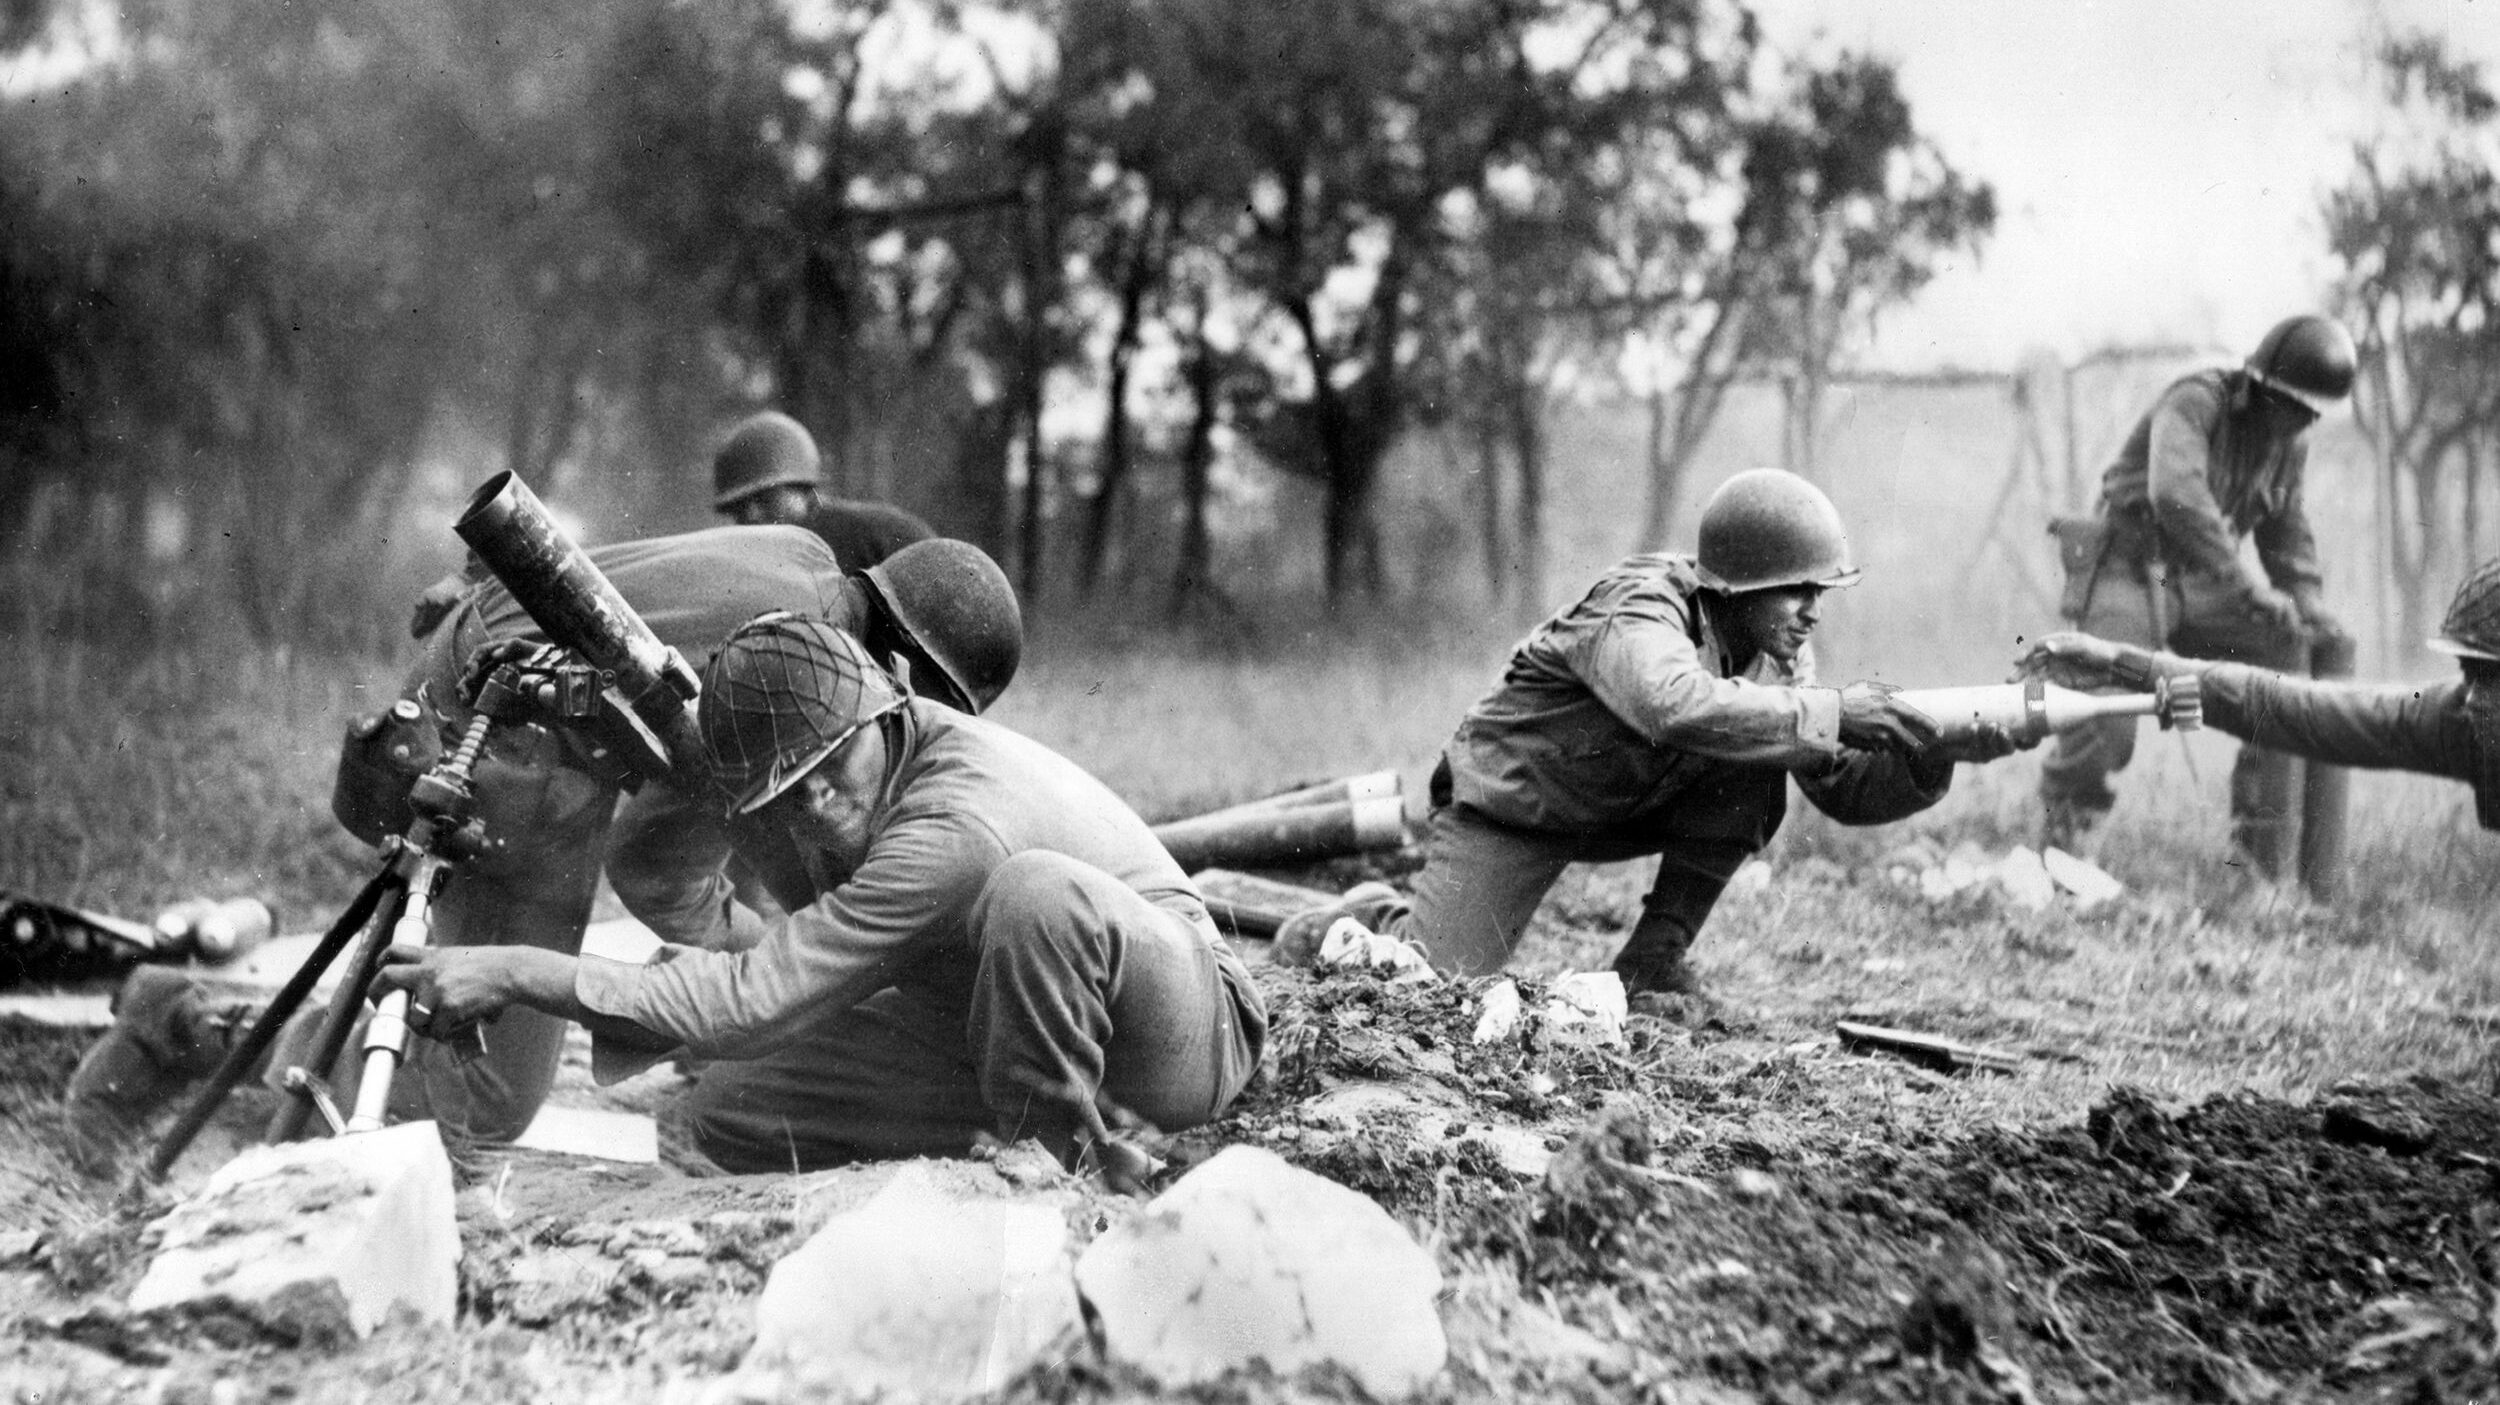 A 92nd Division mortar squad fires their weapons near Massa, on Italy’s west coast, November 1944.